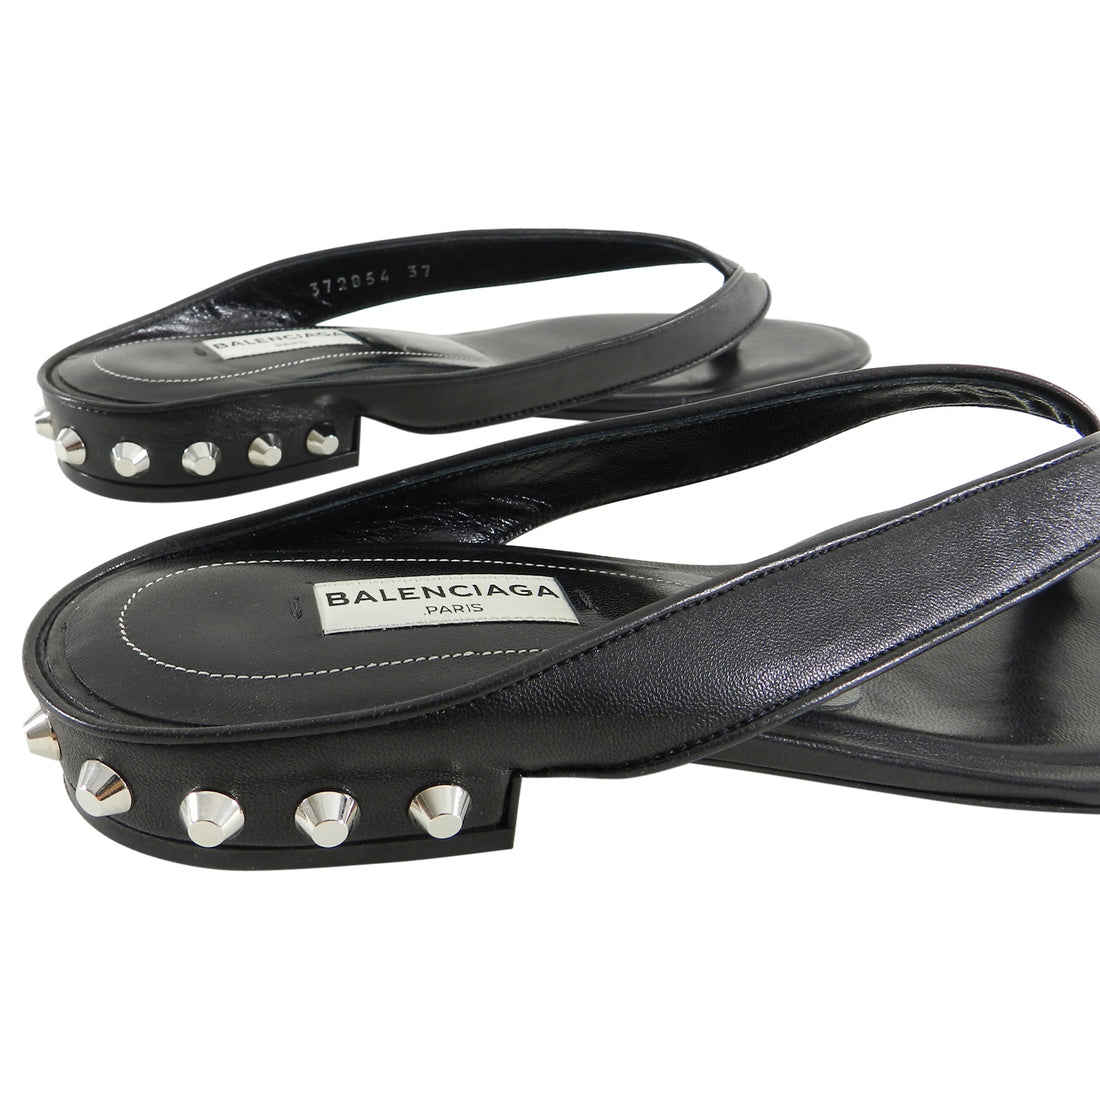 Balenciaga Black Leather Thong Sandals With Silver Stud Heels - 37